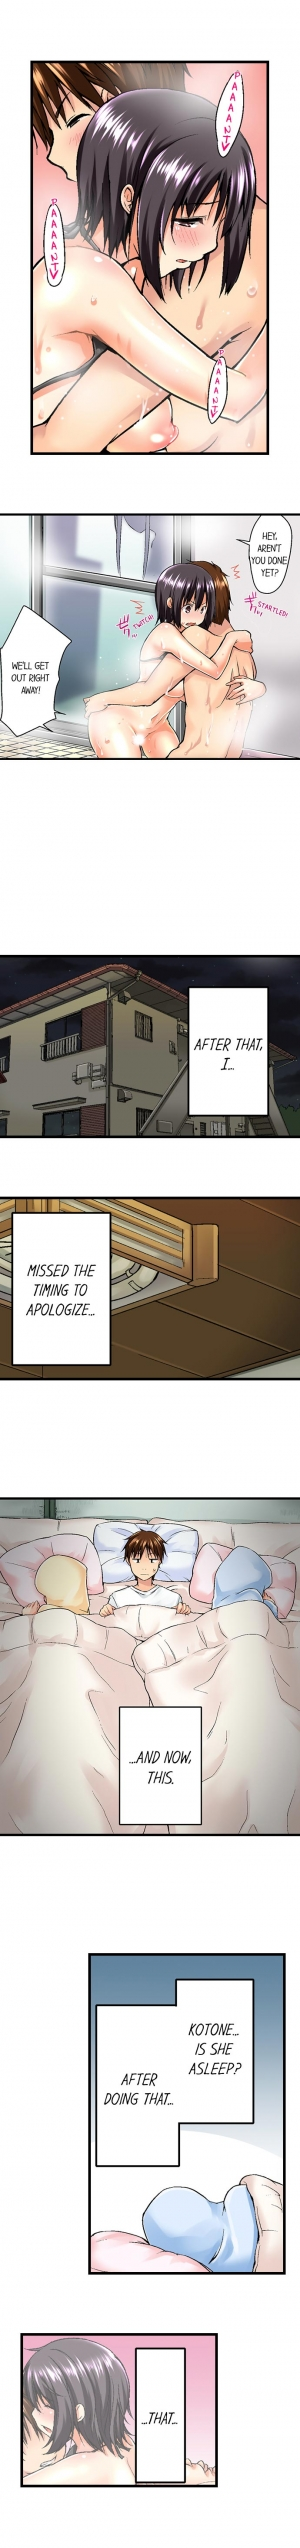 [Kaiduka] My Brother's Slipped Inside Me in The Bathtub (Ongoing) - Page 31